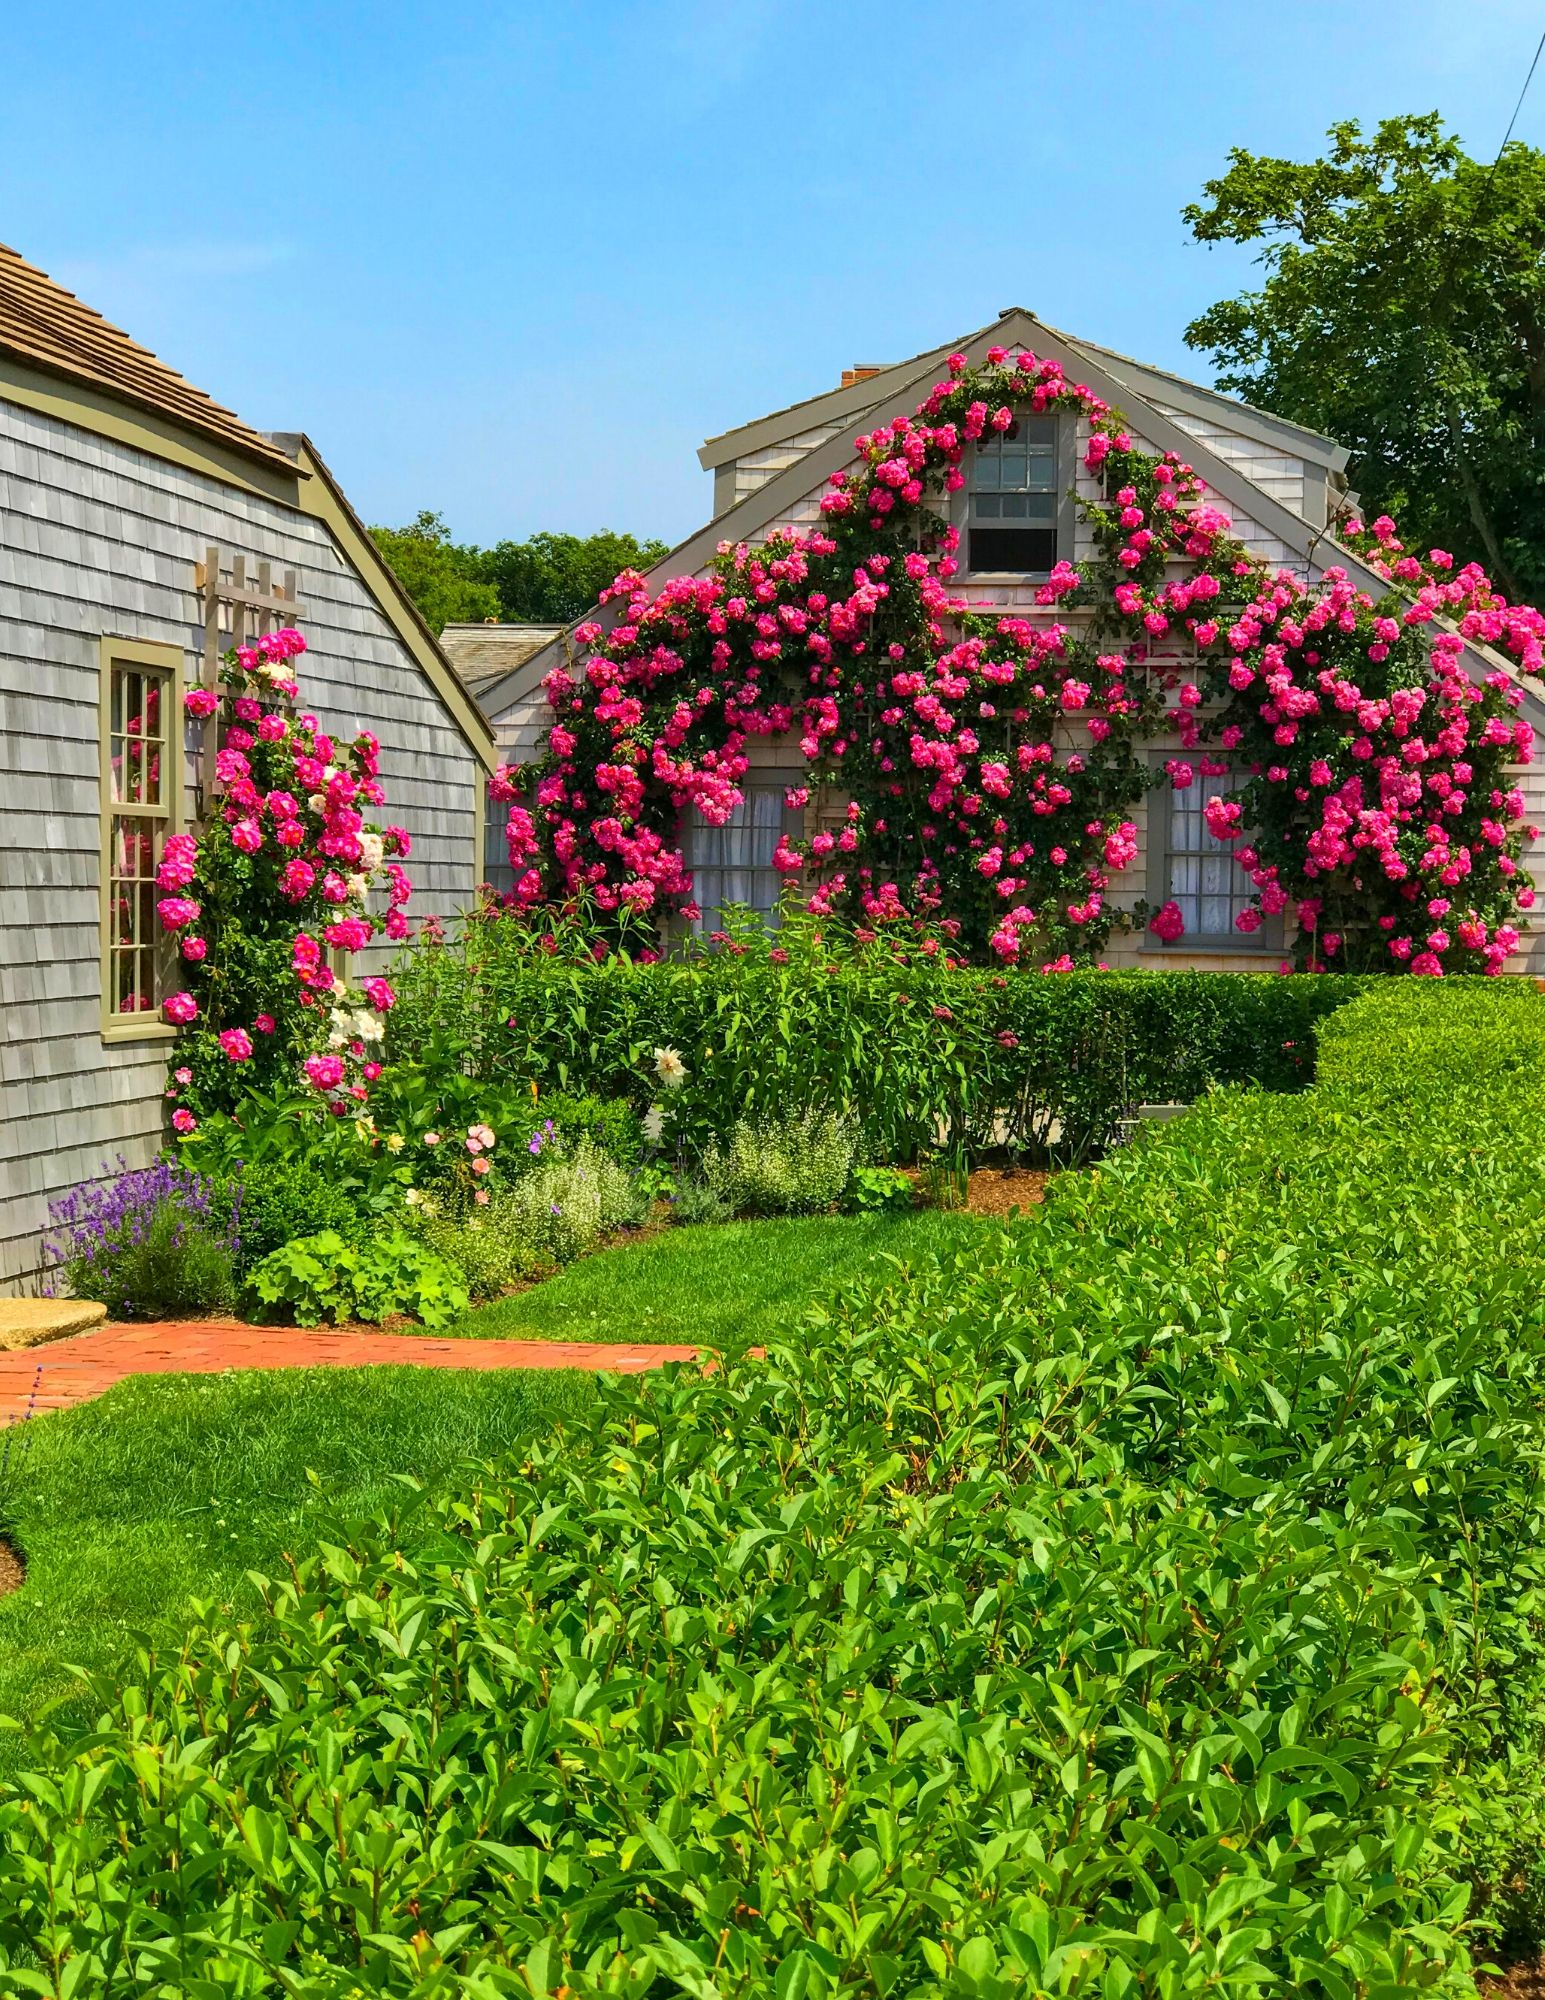 Nantucket Rose Covered Cottages in Sconset-19